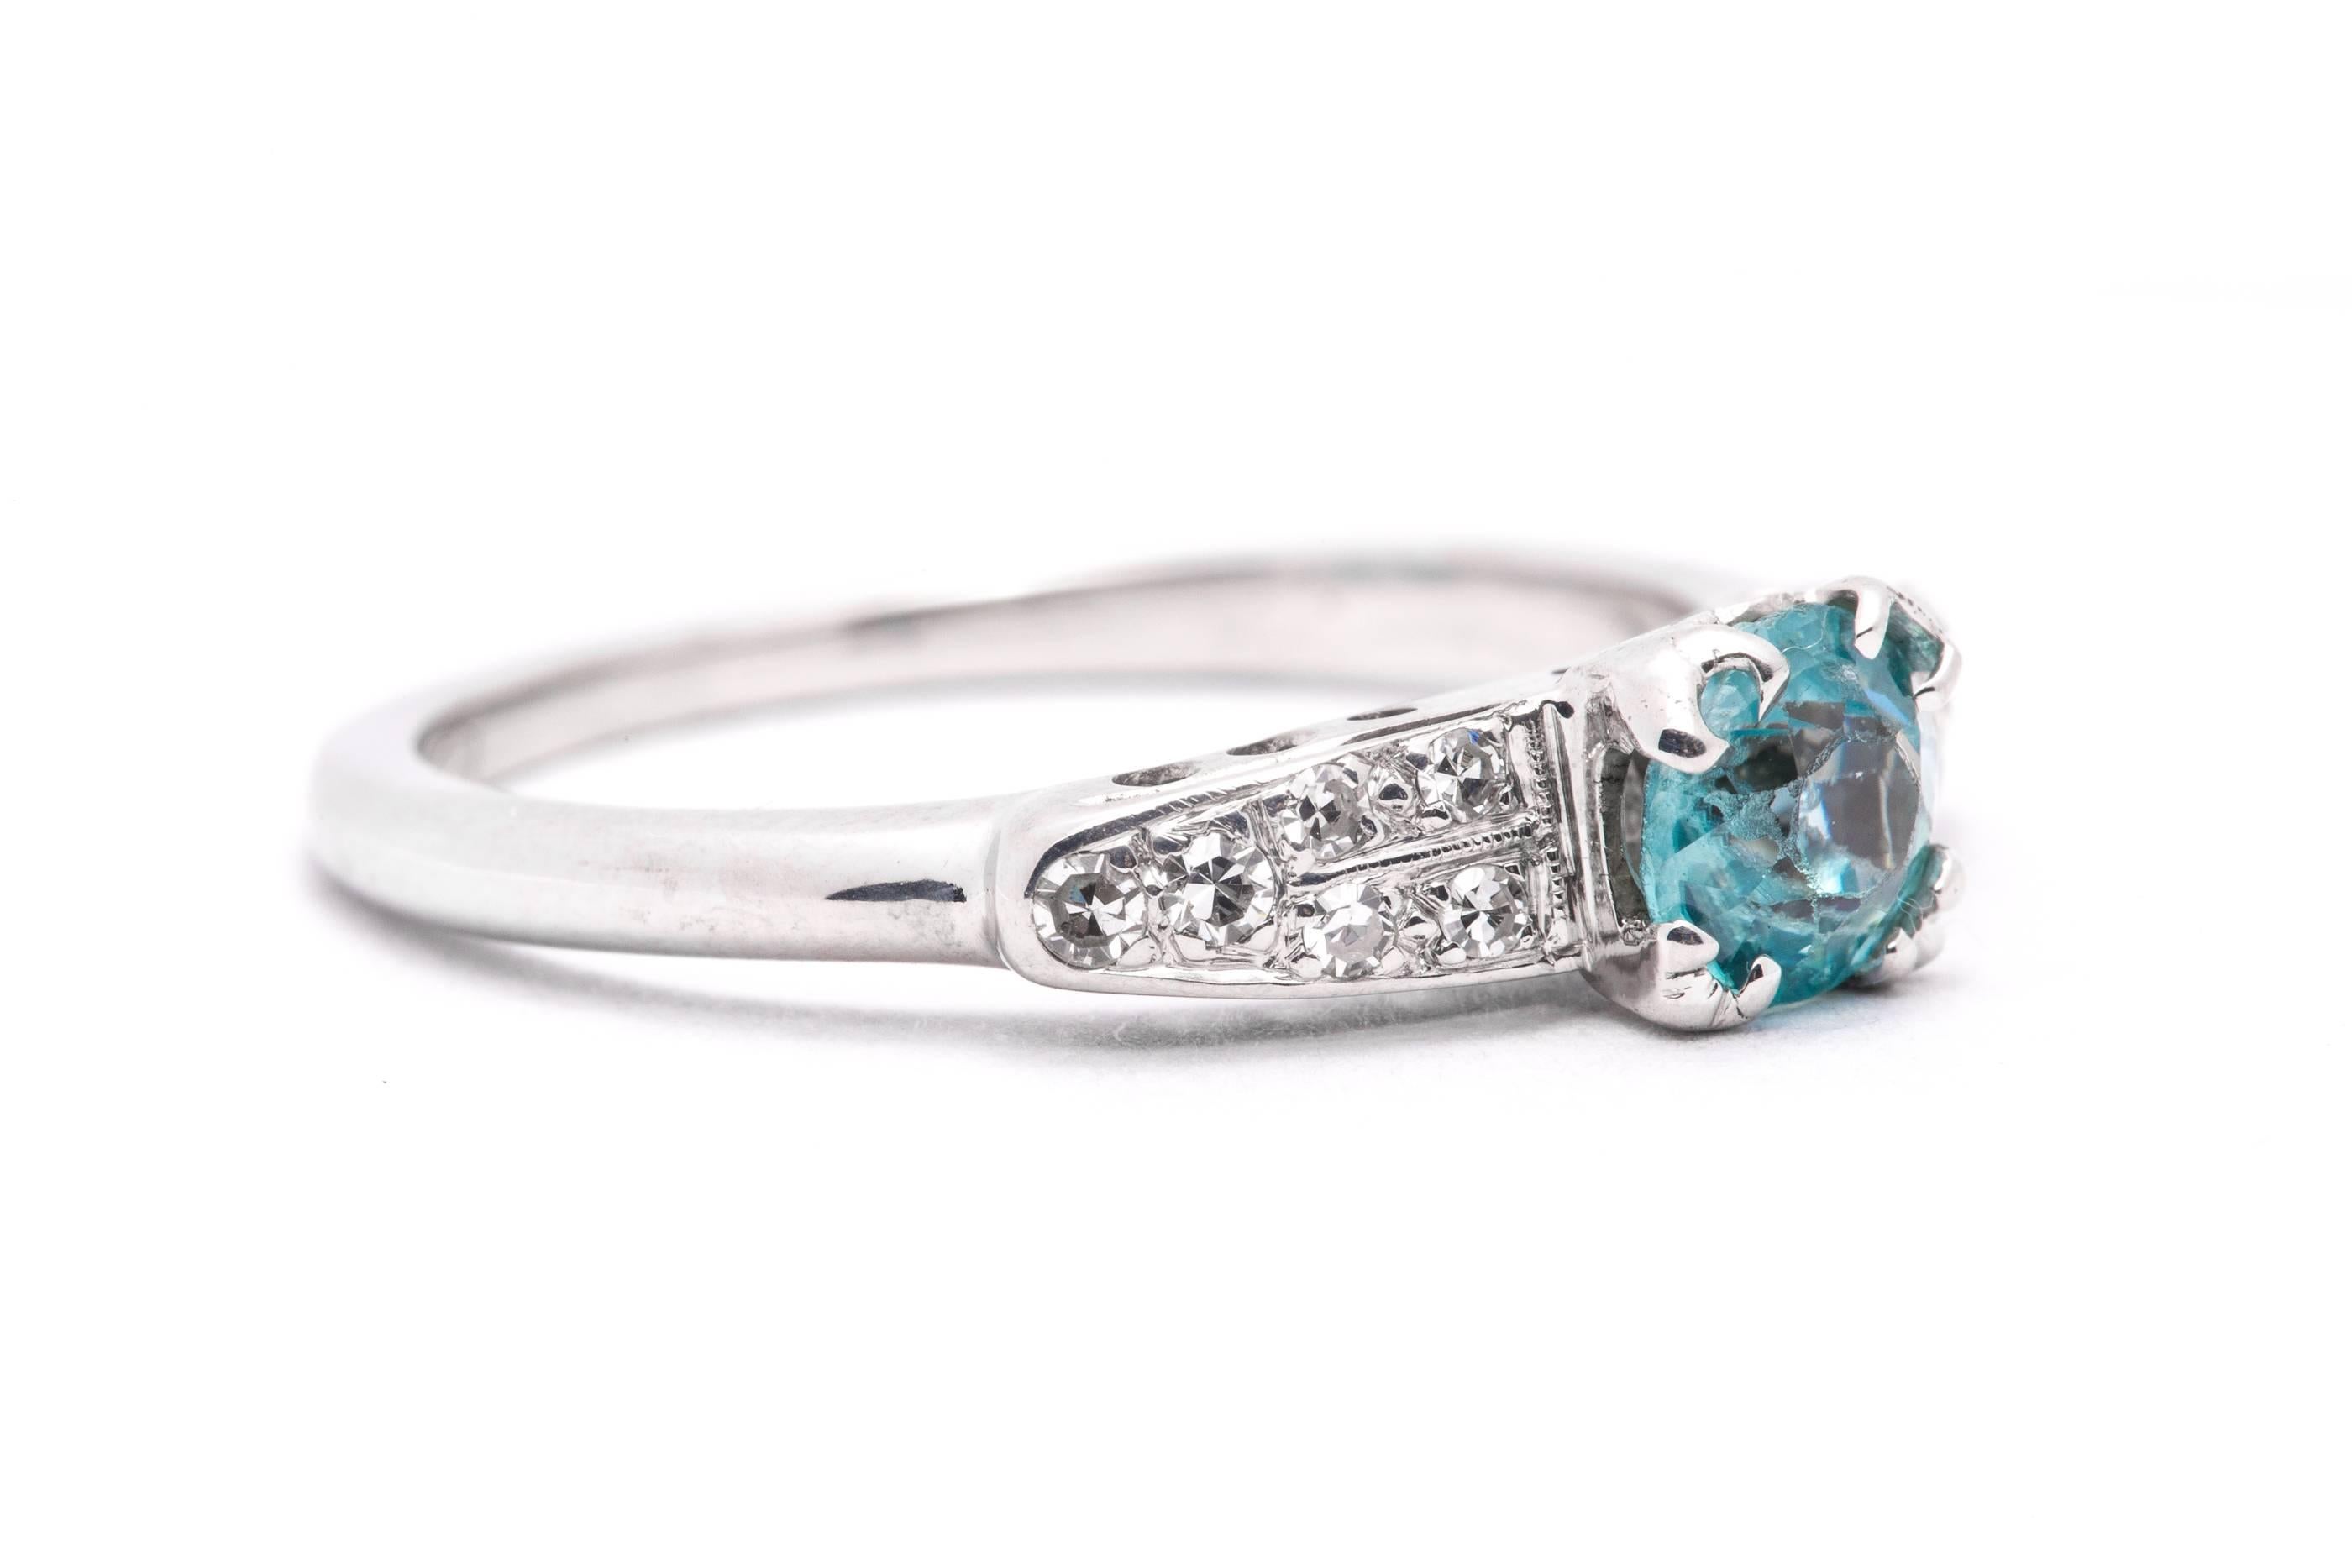 An art deco period blue zircon and diamond ring in 18 karat white gold.  Centered by a one carat European cut blue zircon, this ring features accenting pave set Swiss cut diamonds.

Grading as beautiful vivid sky blue color, the blue zircon is of VS